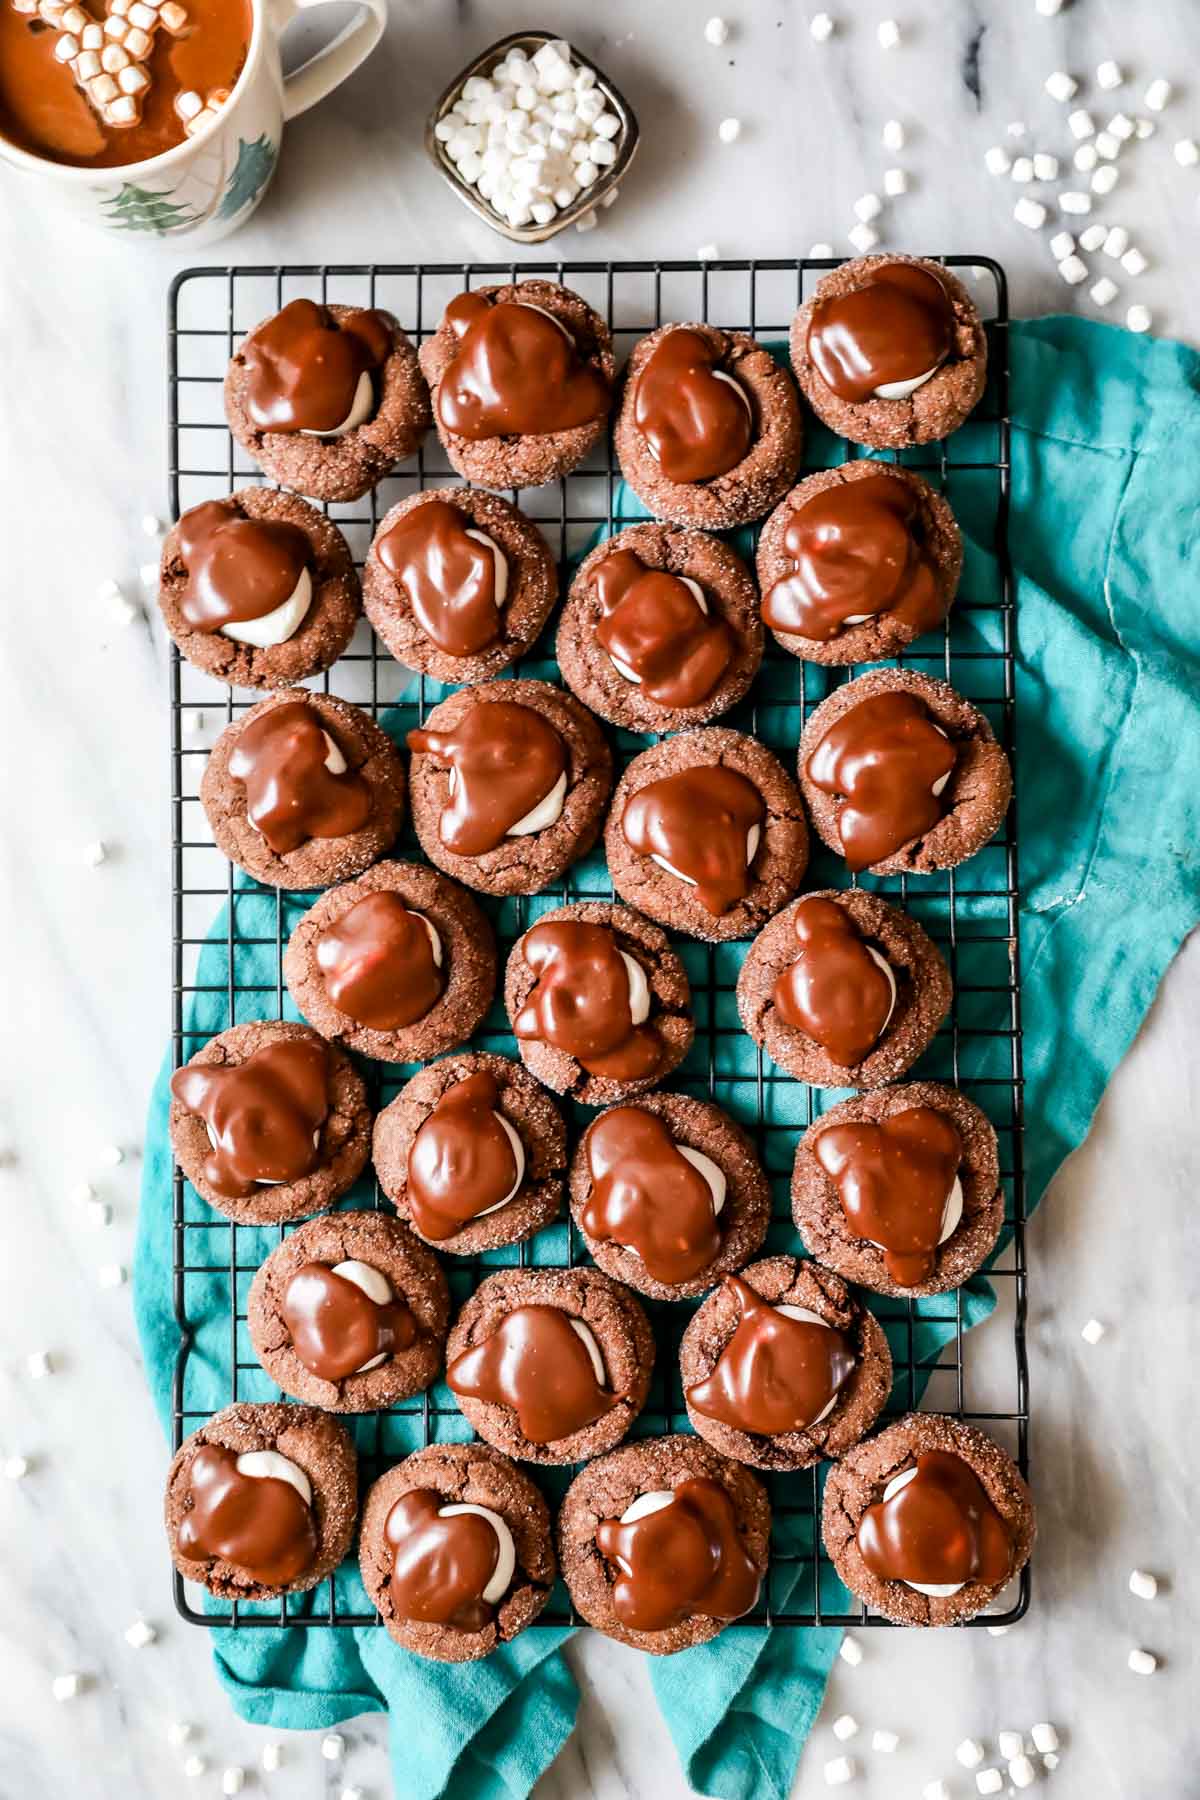 Overhead view of a cooling rack of chocolate cookies topped with marshmallows and chocolate ganache.